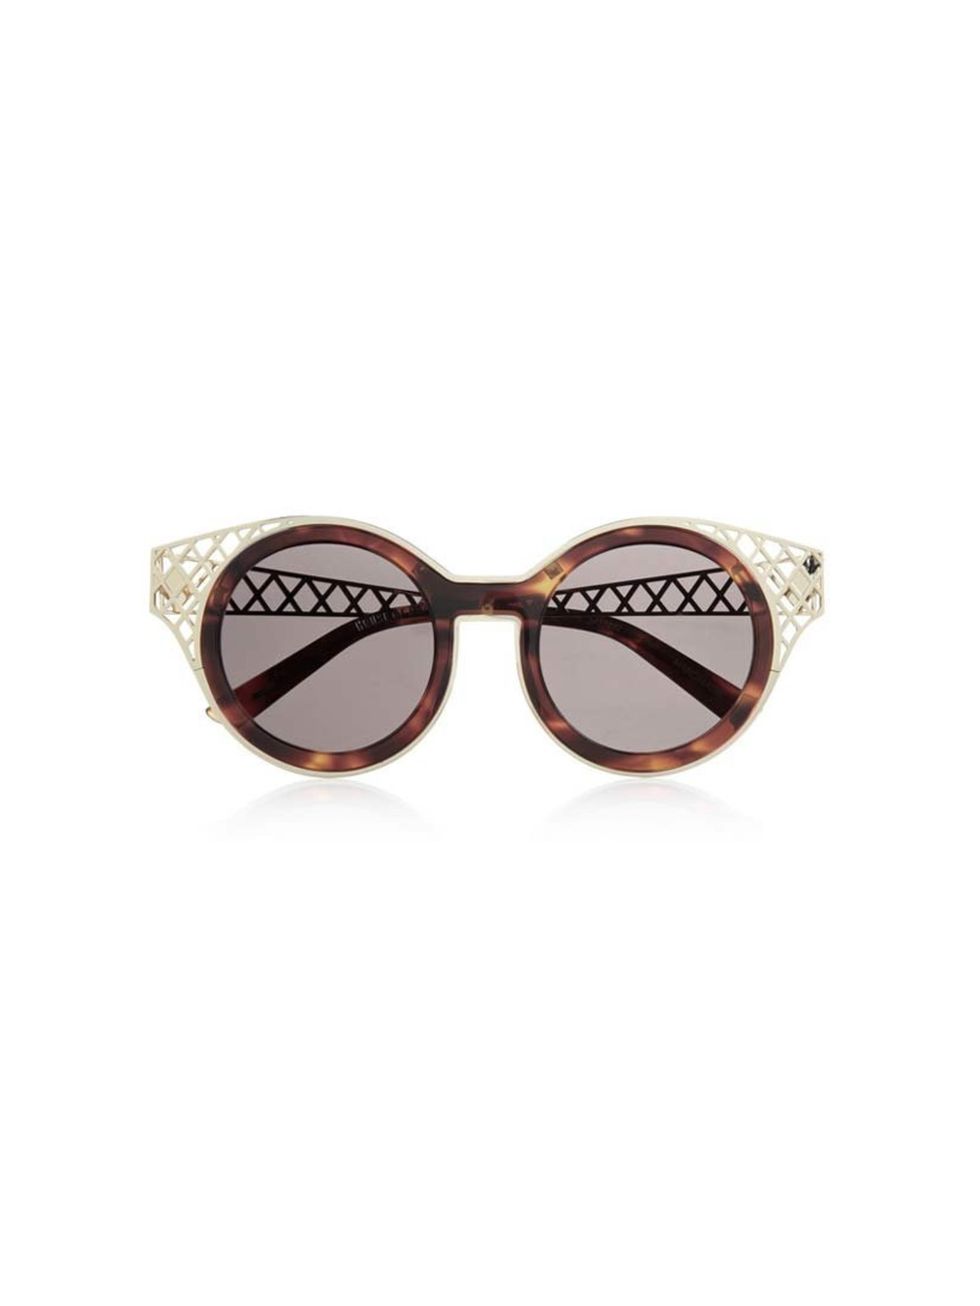 <p>Wallflowers need not apply. </p><p>House of Holland sunglasses, £180 at <a href="http://www.net-a-porter.com/product/471255/House_of_Holland/frame-ache-round-frame-metal-trimmed-sunglasses">Net-A-Porter</a></p>